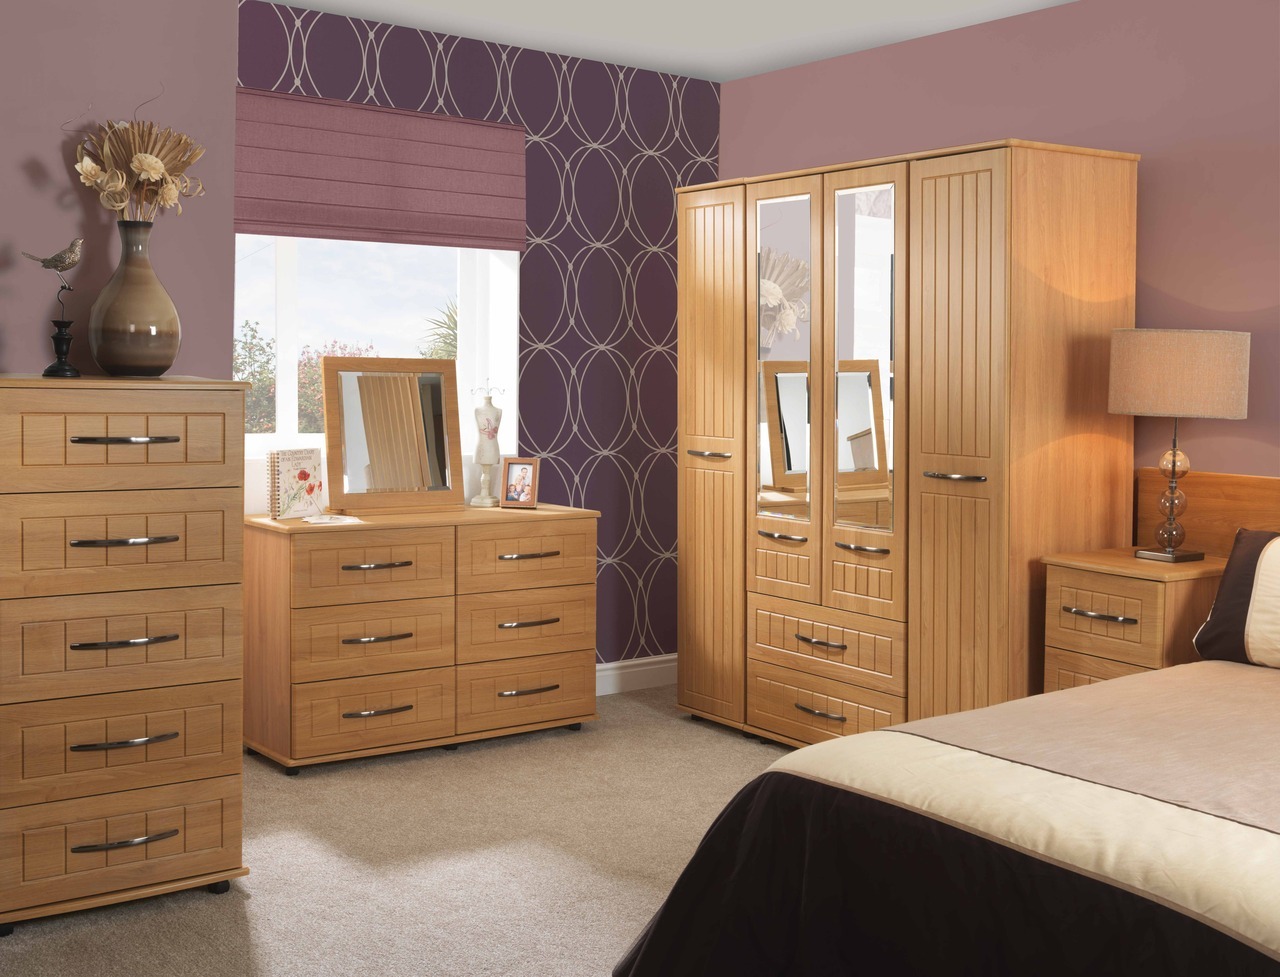 harrison brothers solo plus bedroom furniture